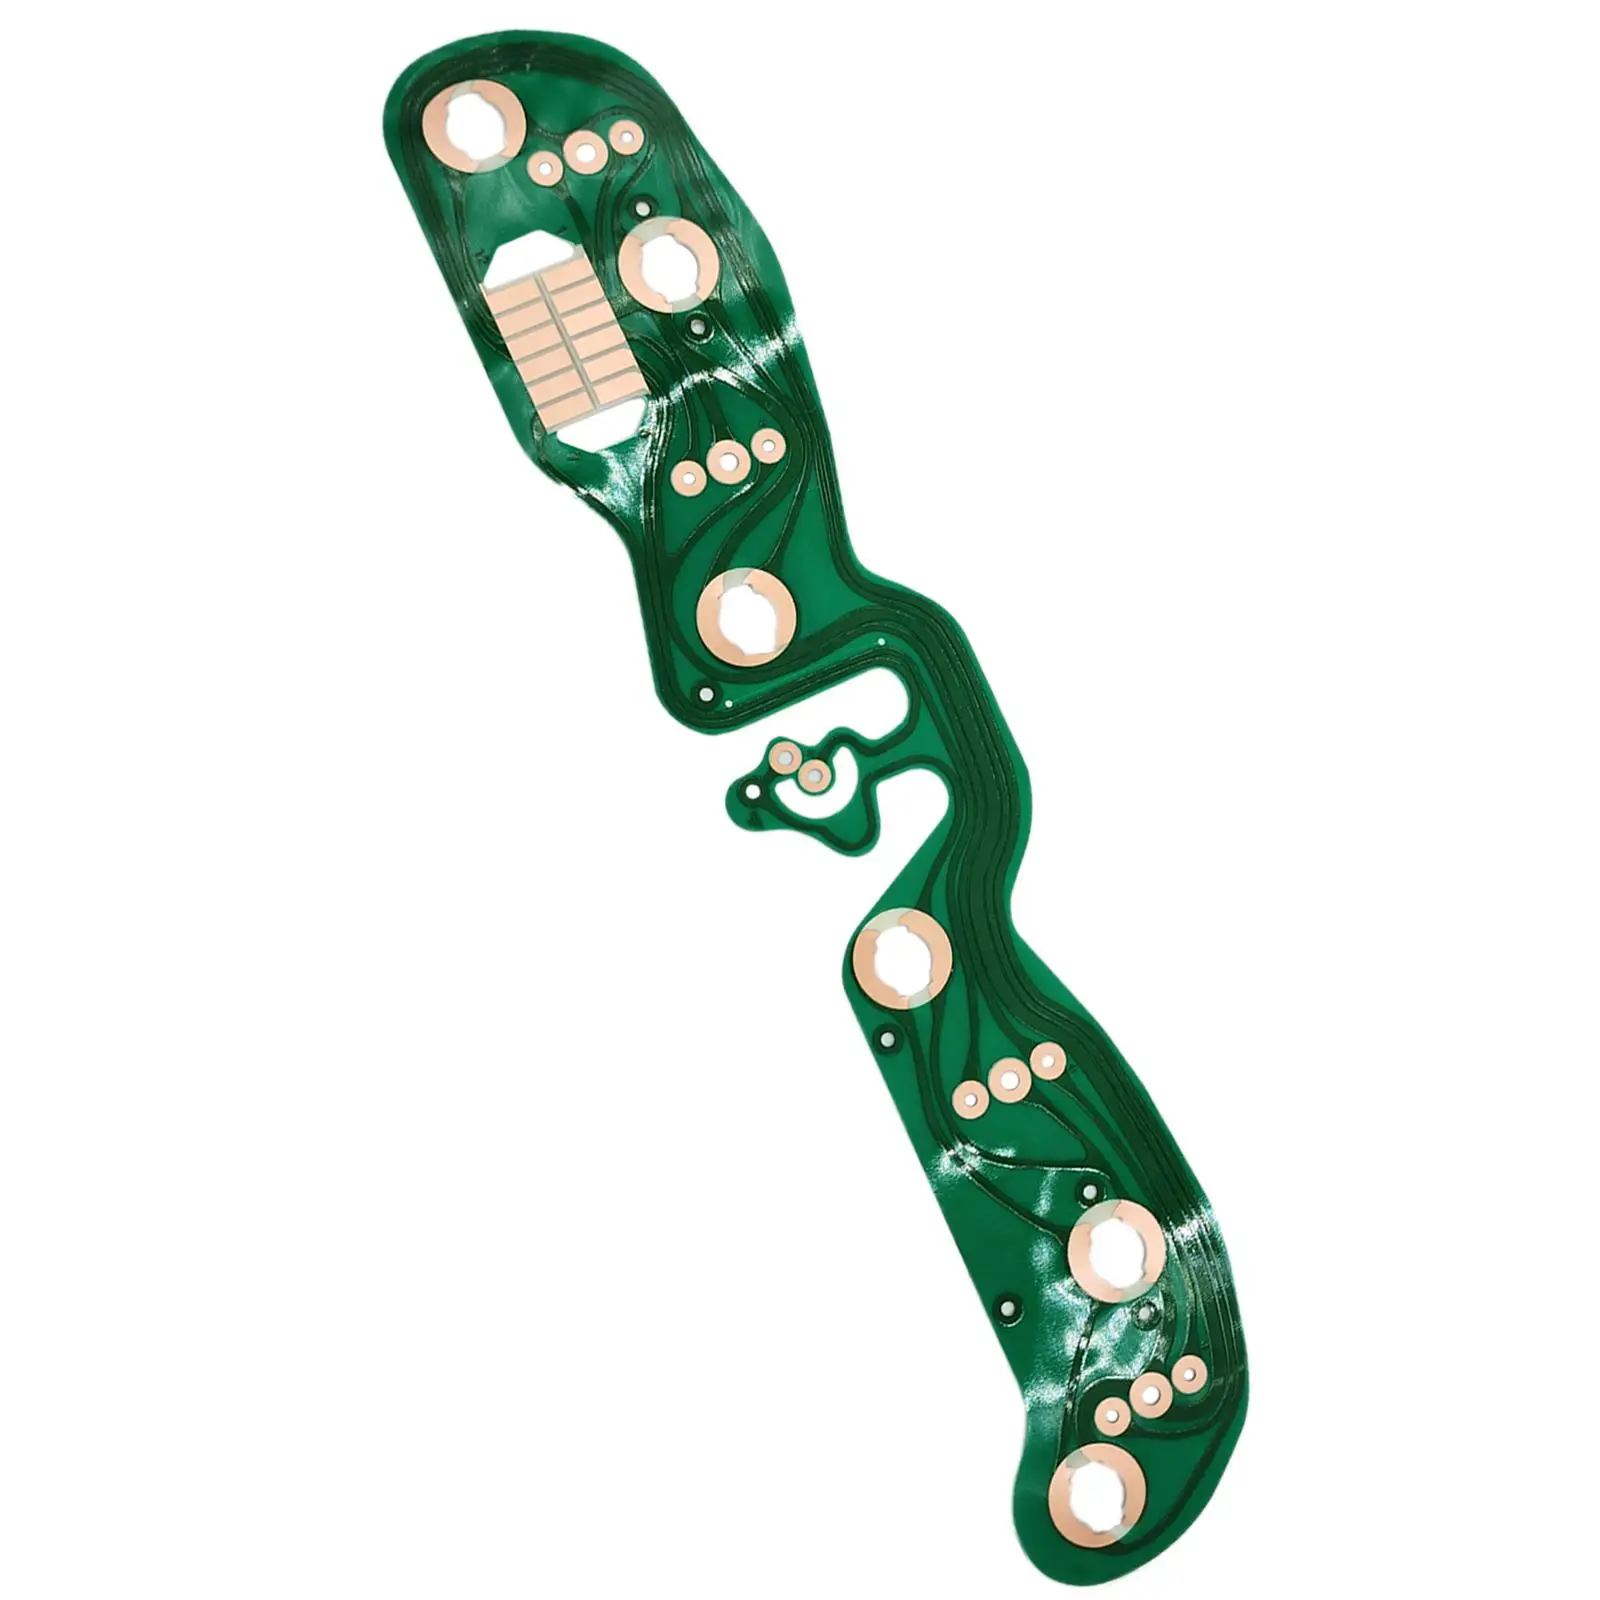 Gauges Printed Circuit Board for Jeep Wrangler Premium Easy to Install